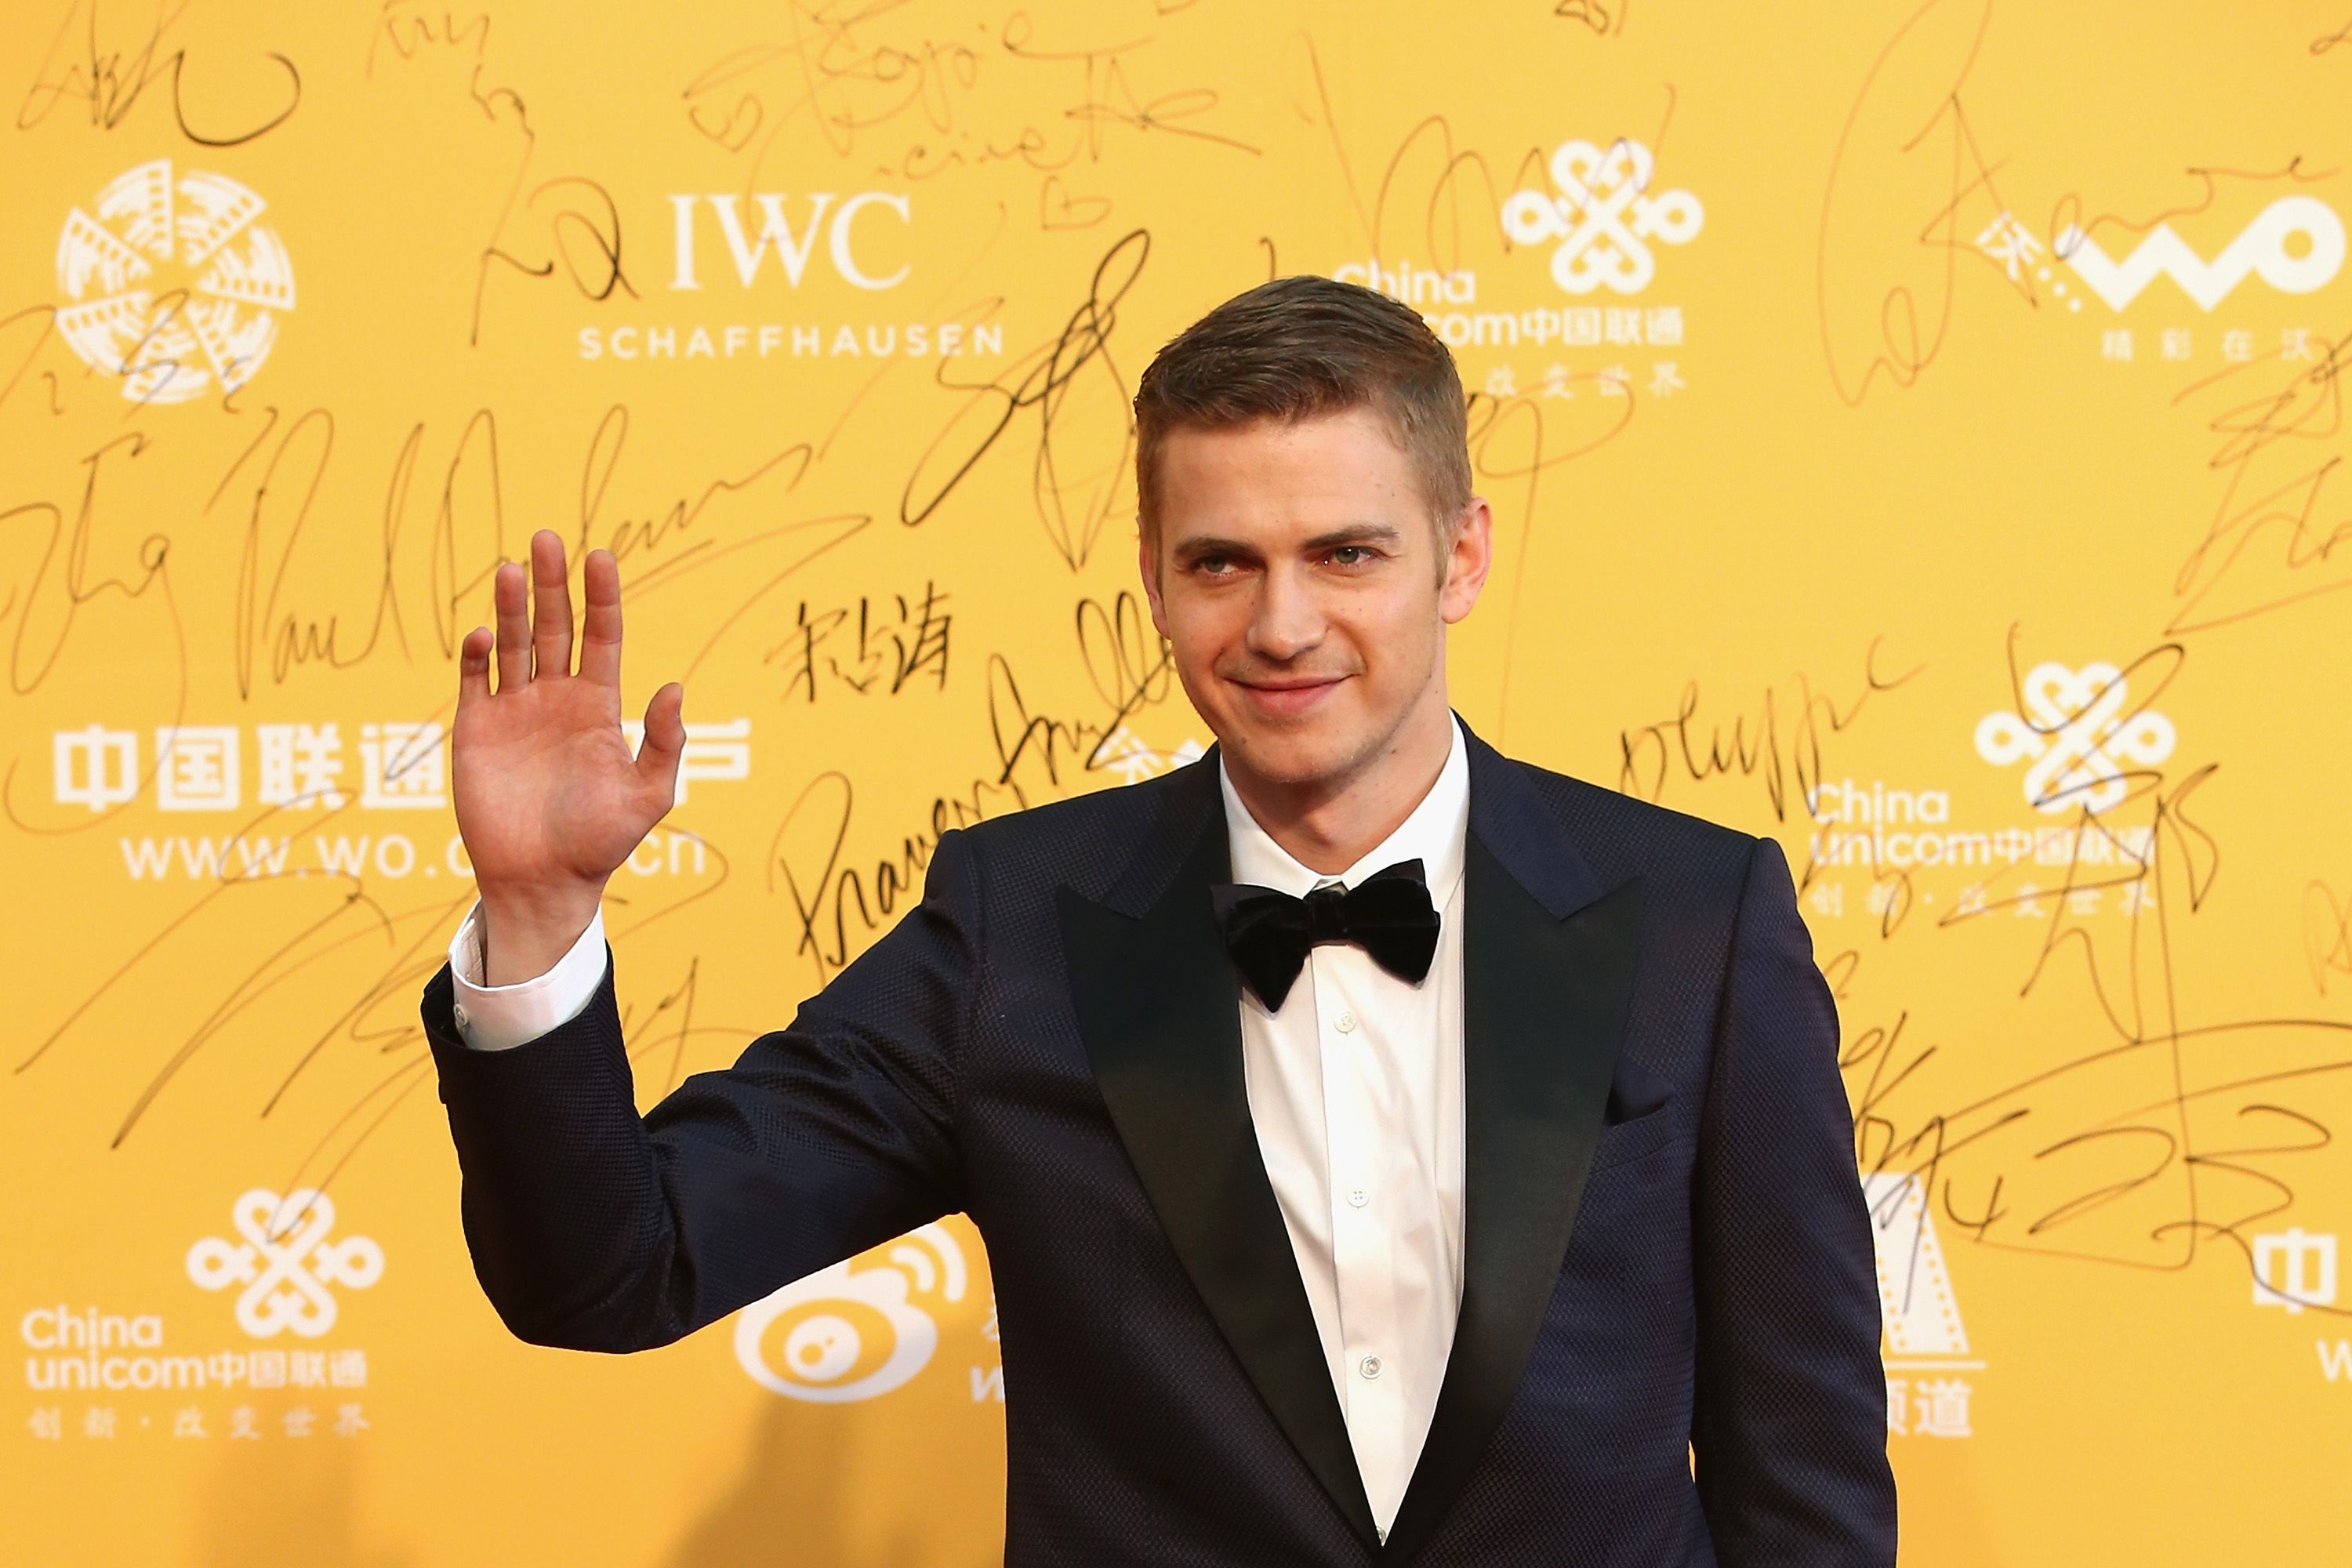 Hayden Christensen at the red carpet of the 4th Beijing International Film Festival in 2014 in Beijing, China | Source: Getty Images